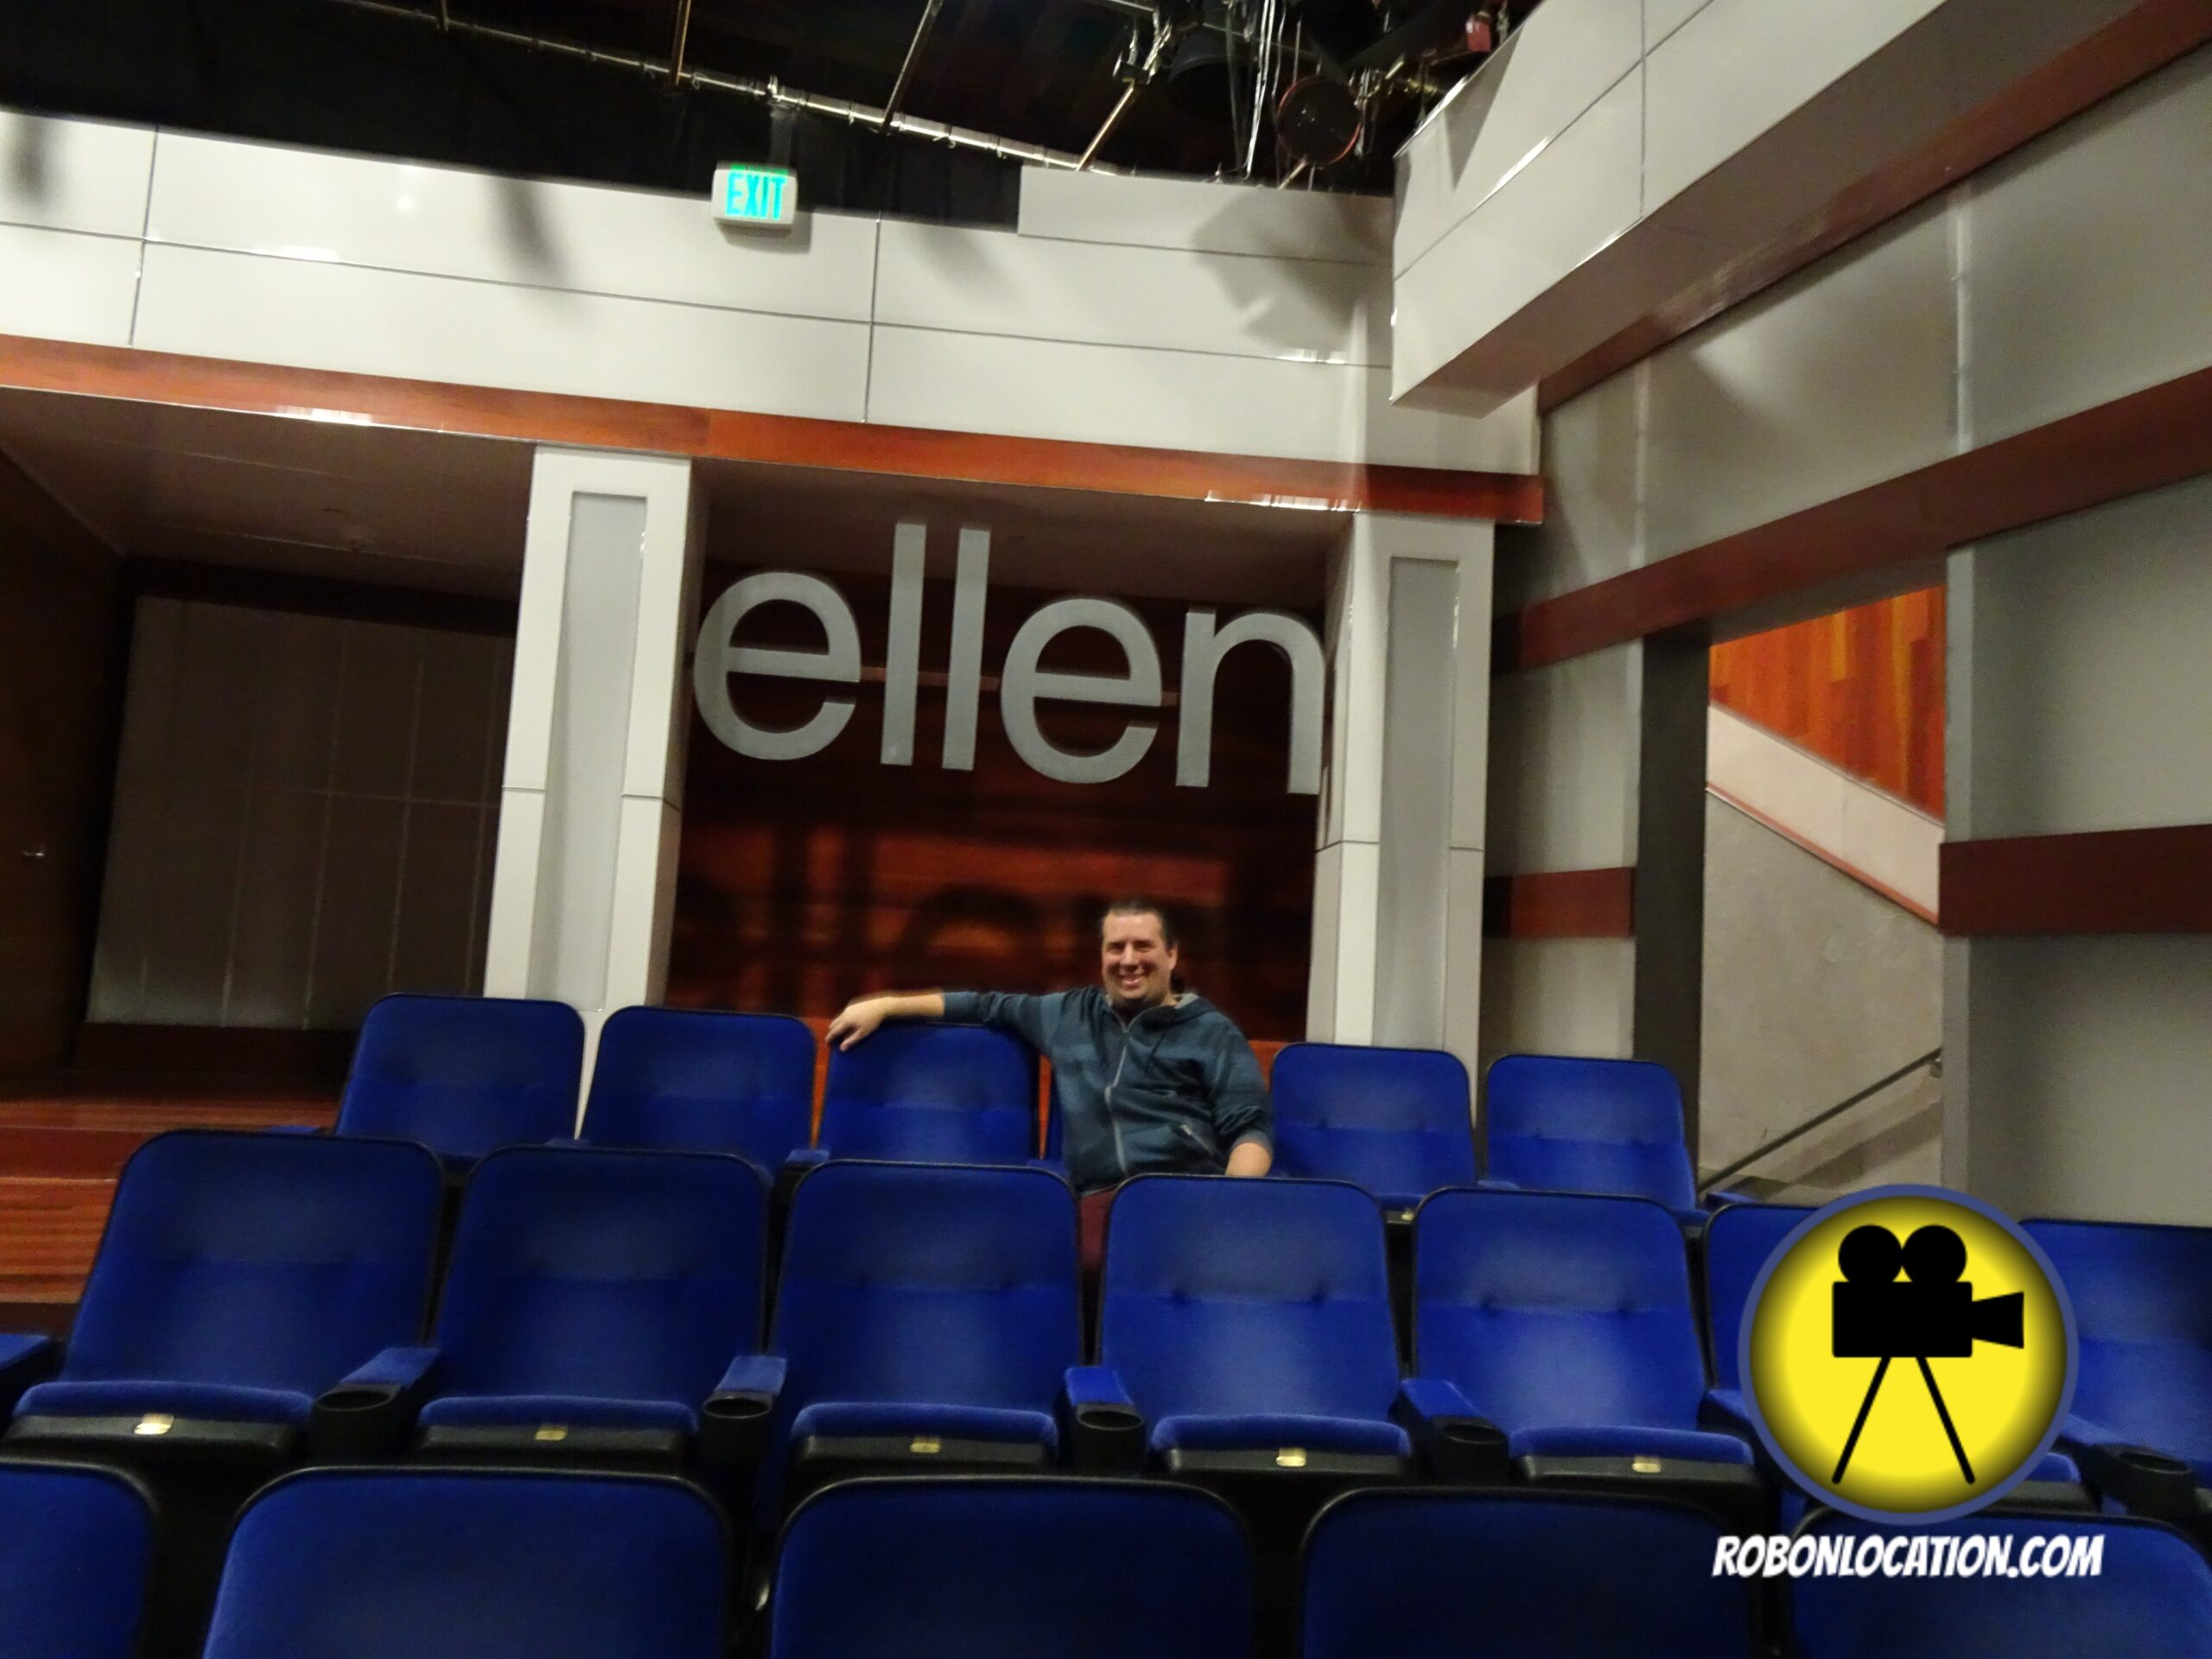 The Ellen Show audience seating